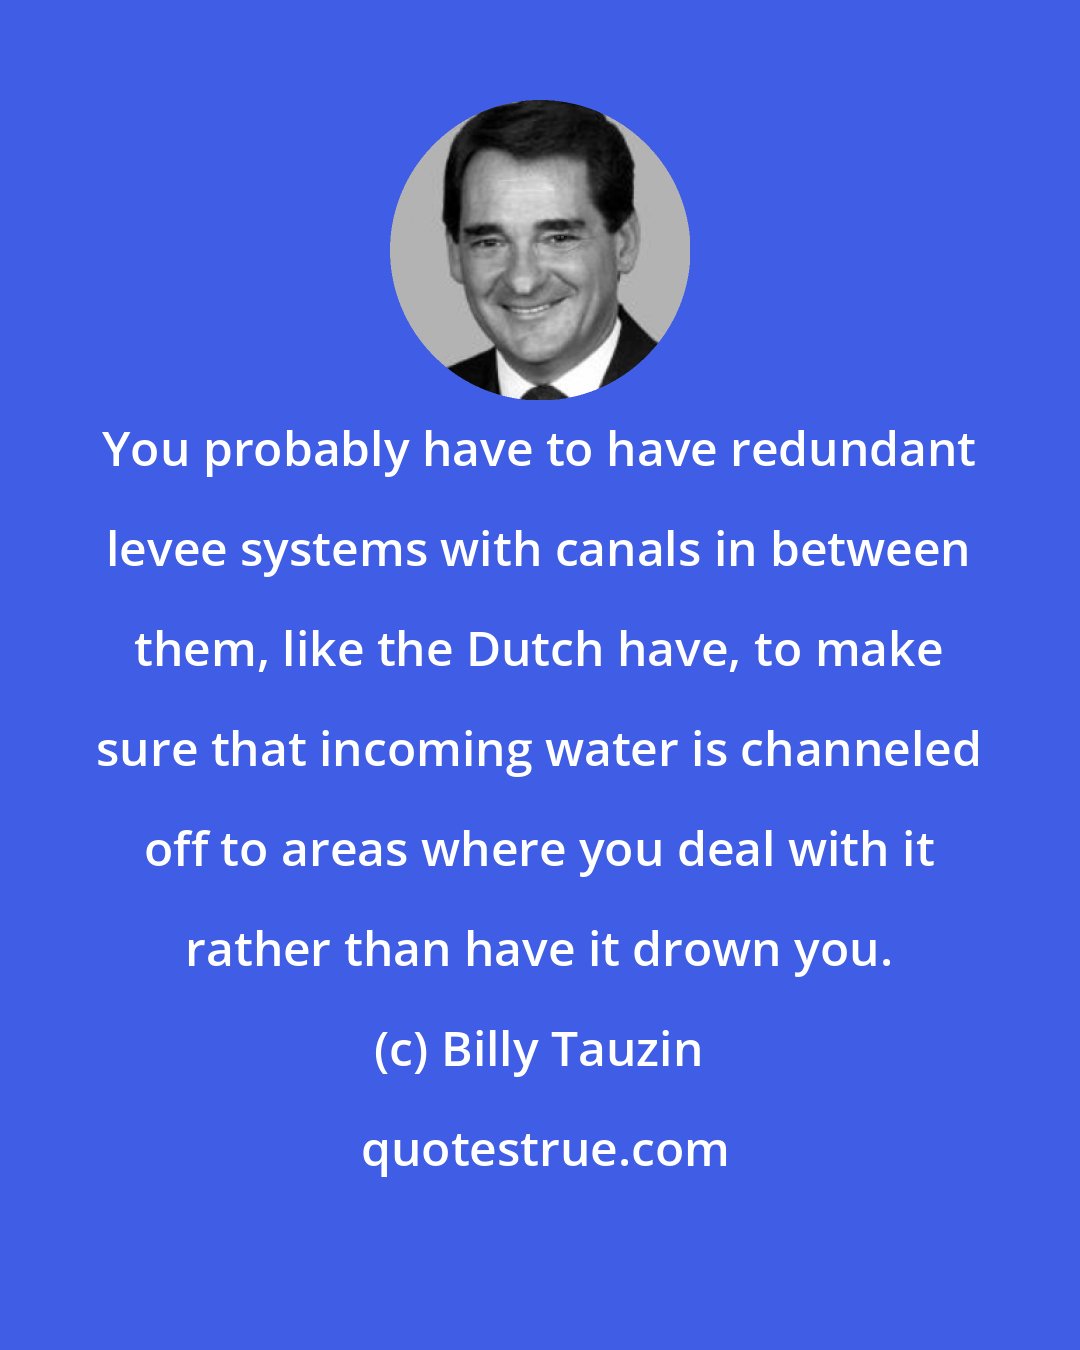 Billy Tauzin: You probably have to have redundant levee systems with canals in between them, like the Dutch have, to make sure that incoming water is channeled off to areas where you deal with it rather than have it drown you.